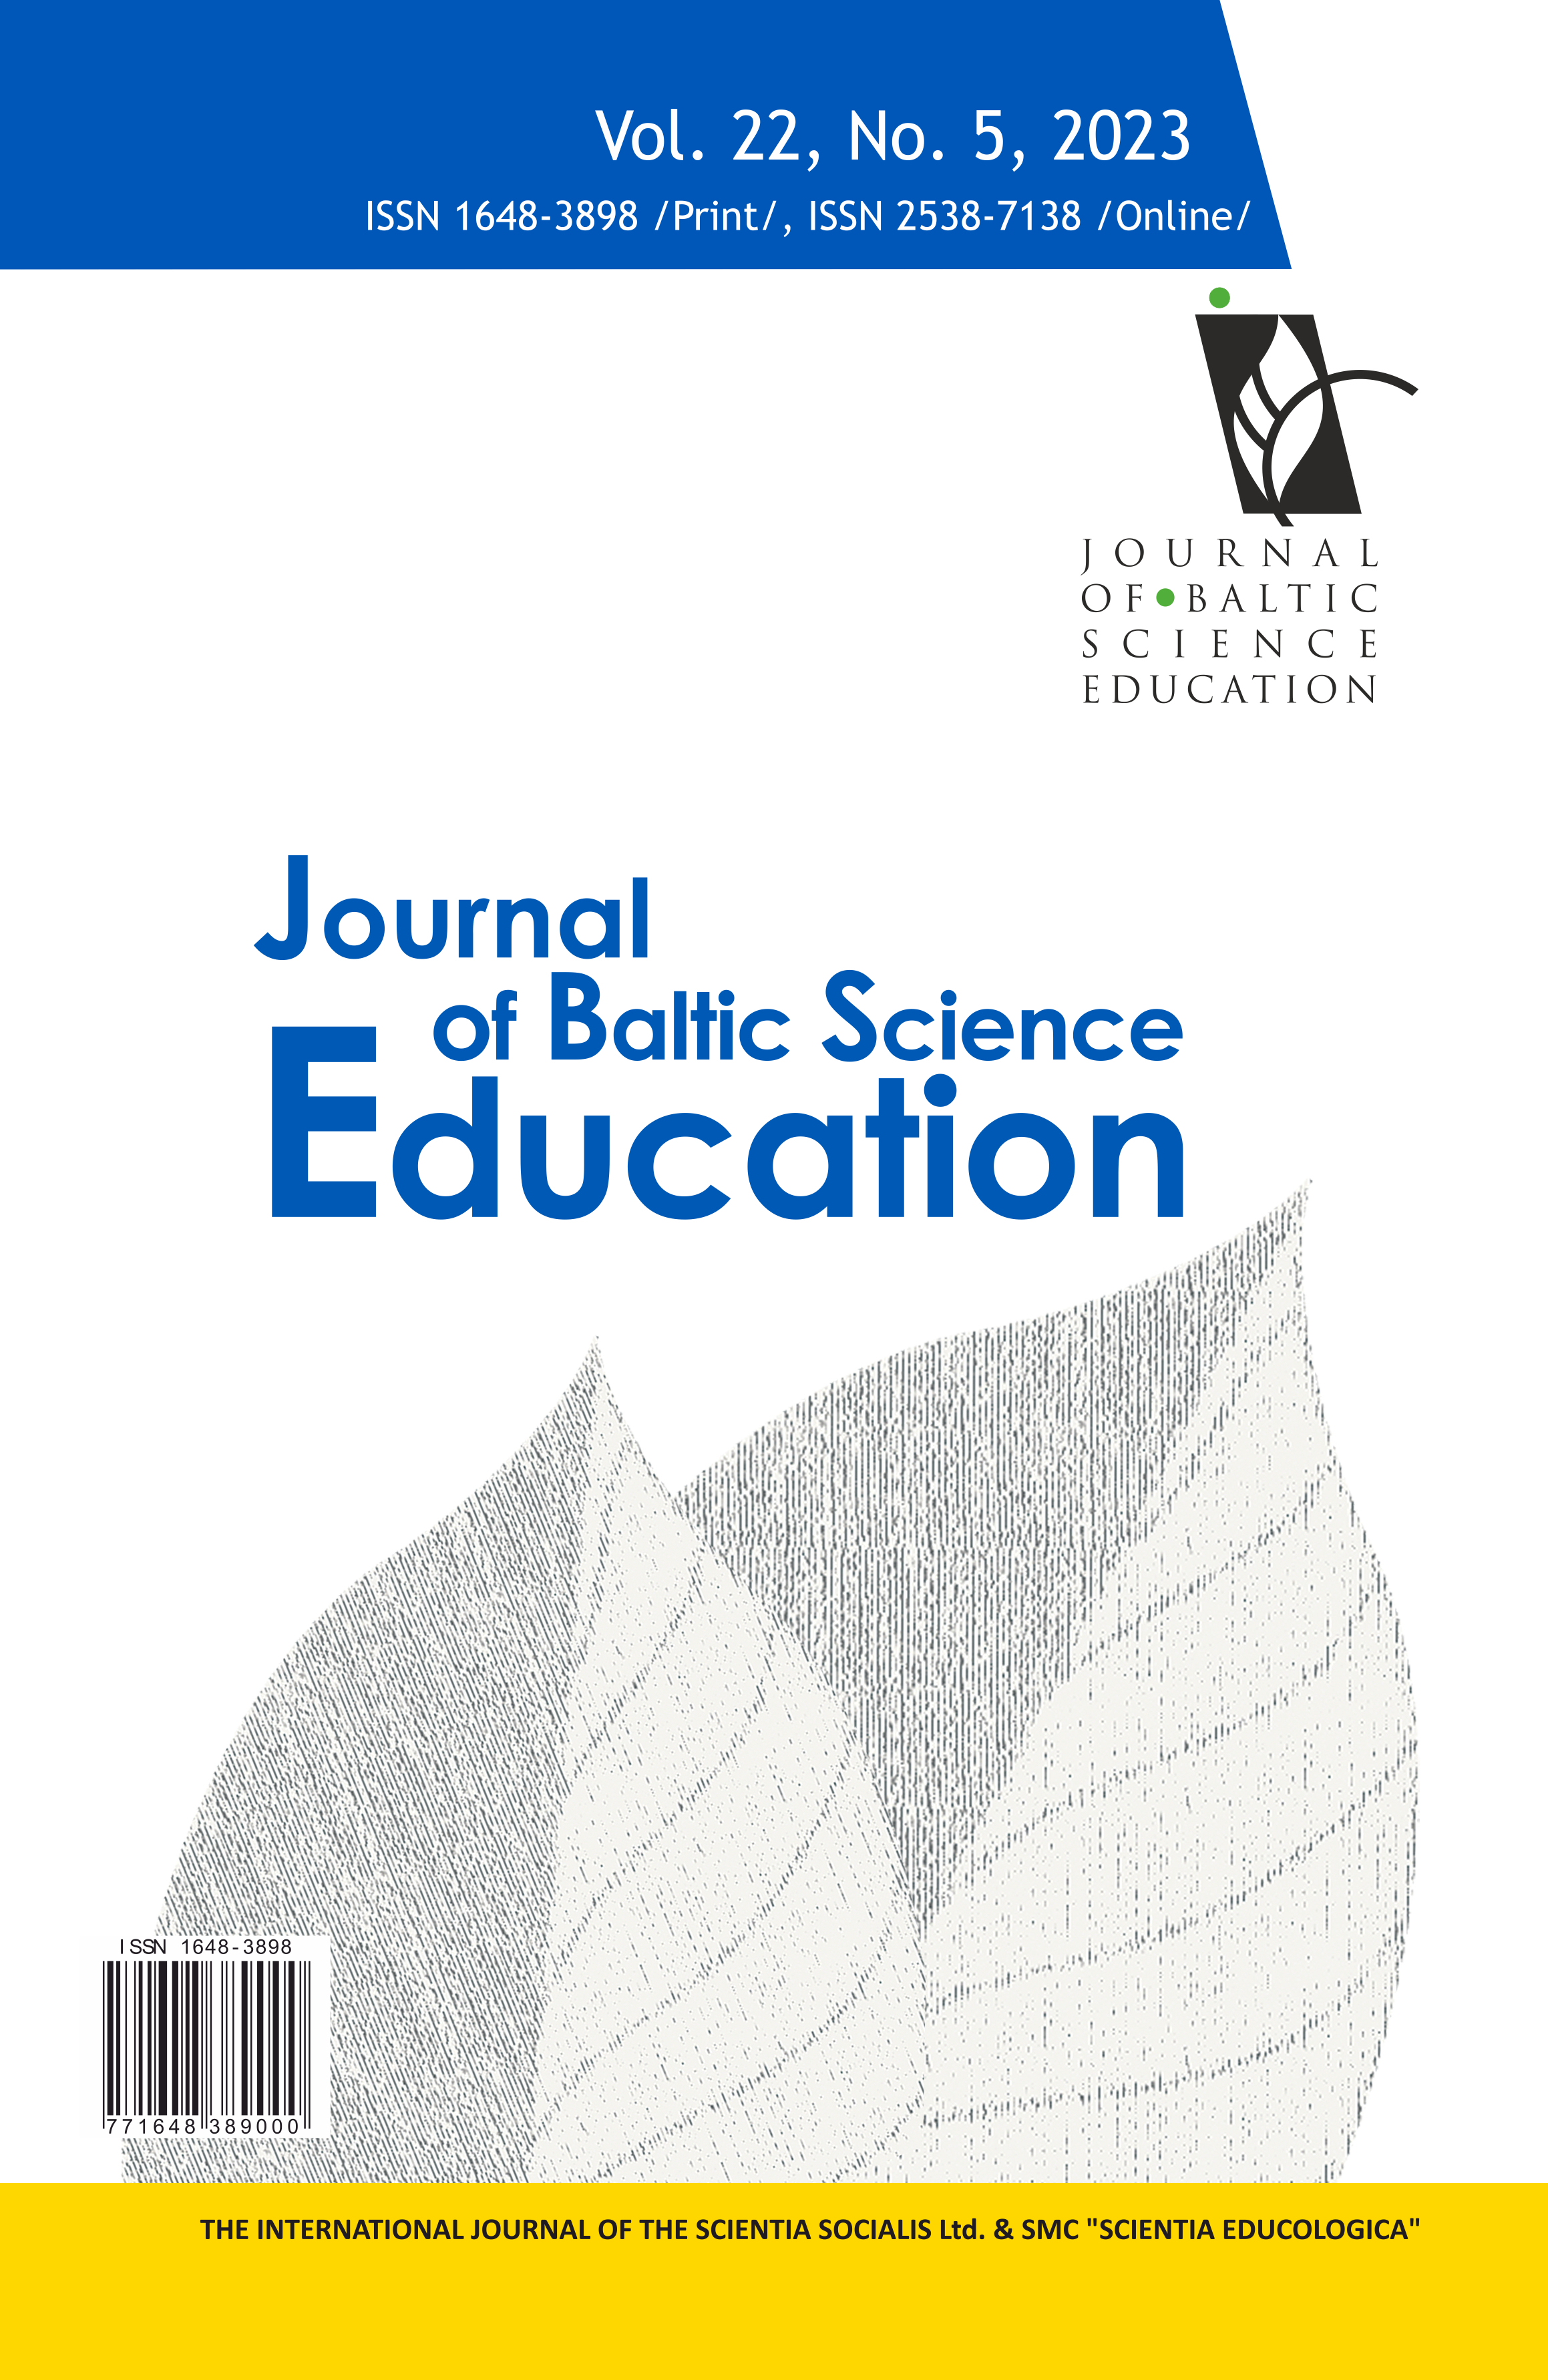 PERCEPTIONS OF PRIMARY PRE-SERVICE TEACHERS IN THE UTILIZATION OF PLANT IDENTIFICATION APPS AS EDUCATIONAL TOOLS